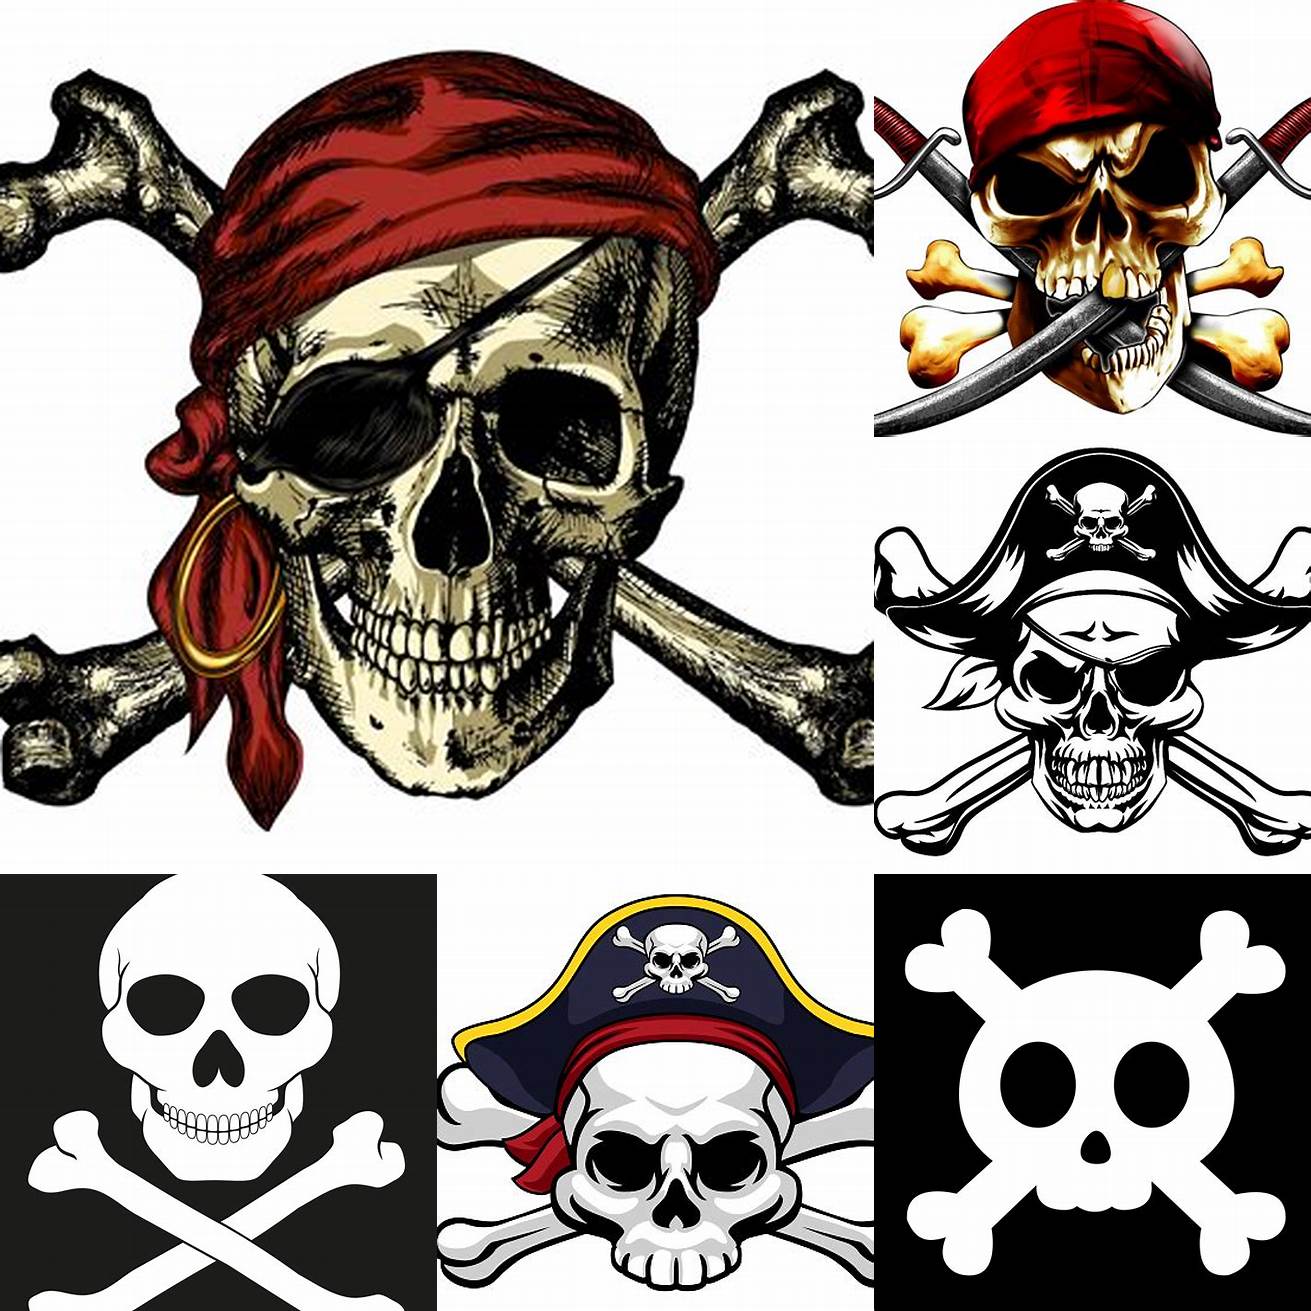 A pirate hat with a skull and crossbones design